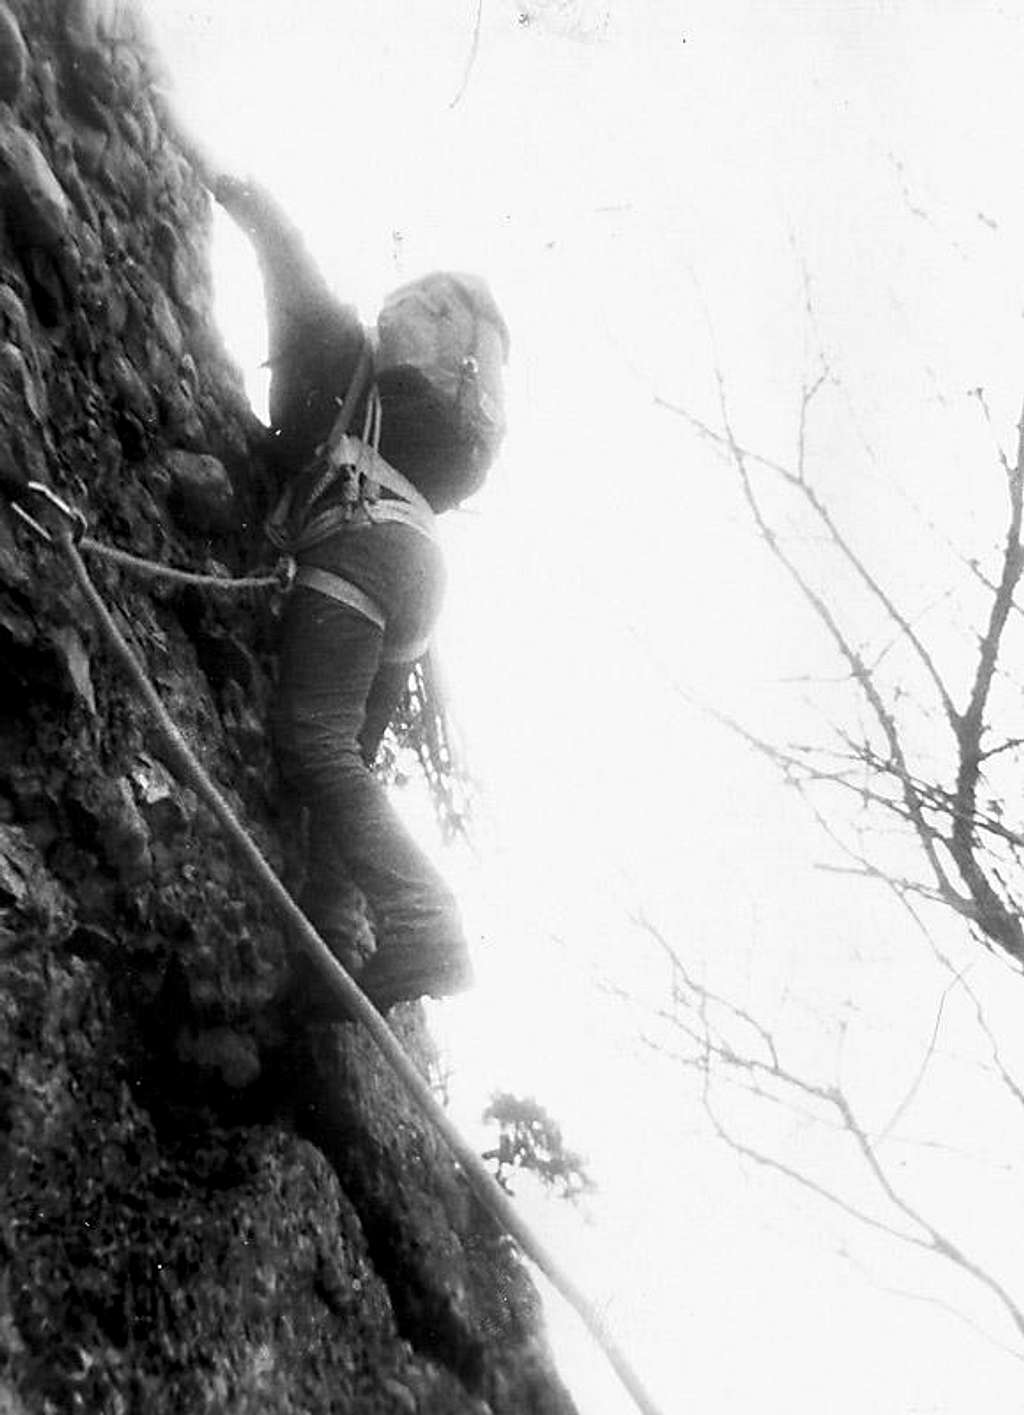 Cragging in New England in the 1970s